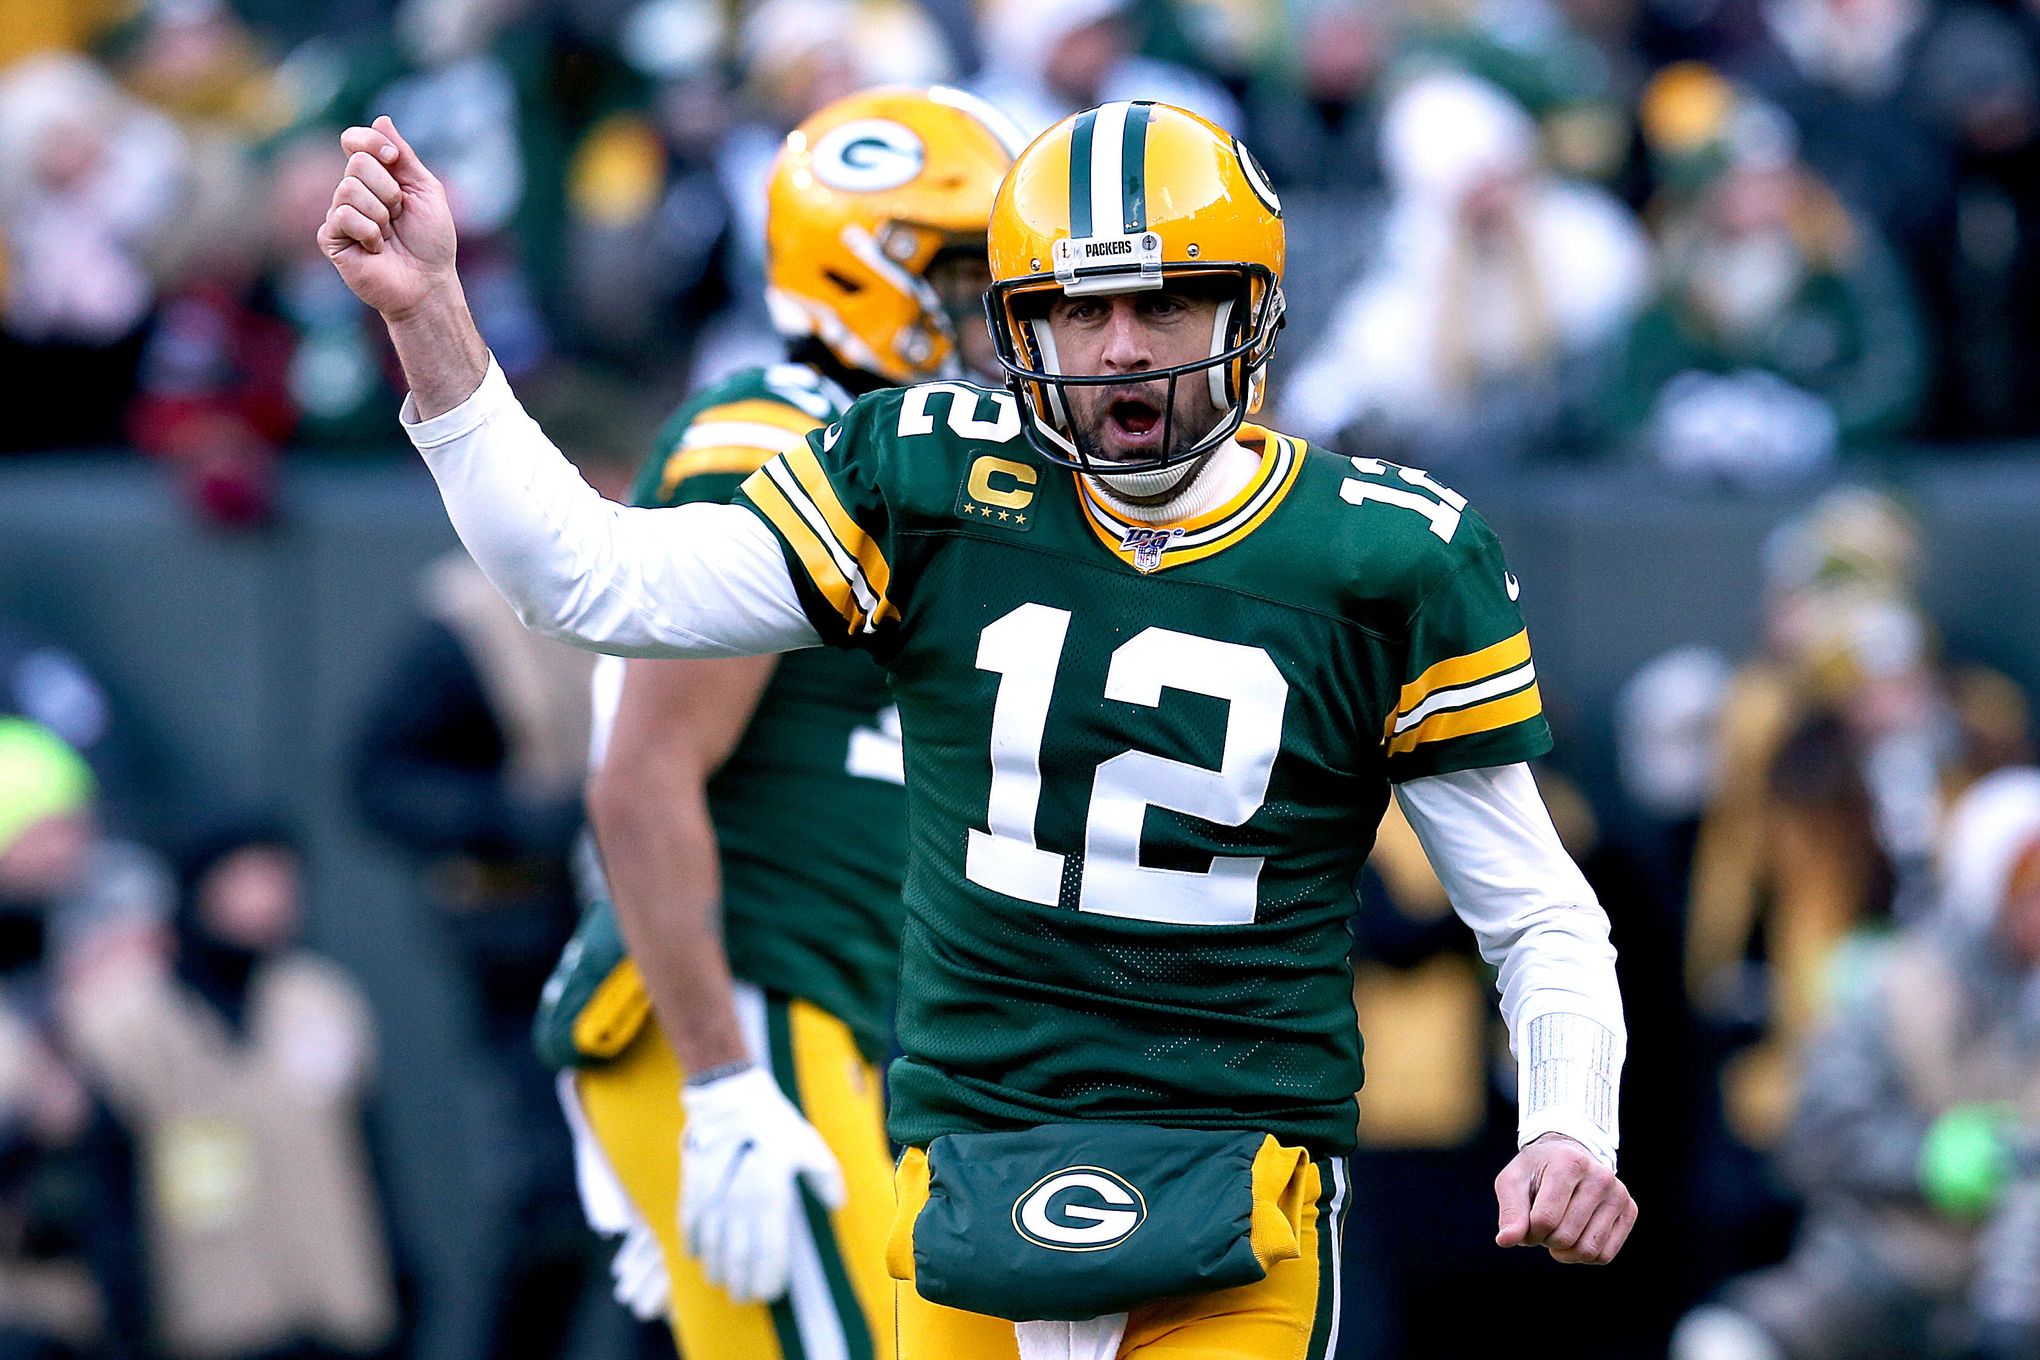 Packers lock up third NFC North title in a row